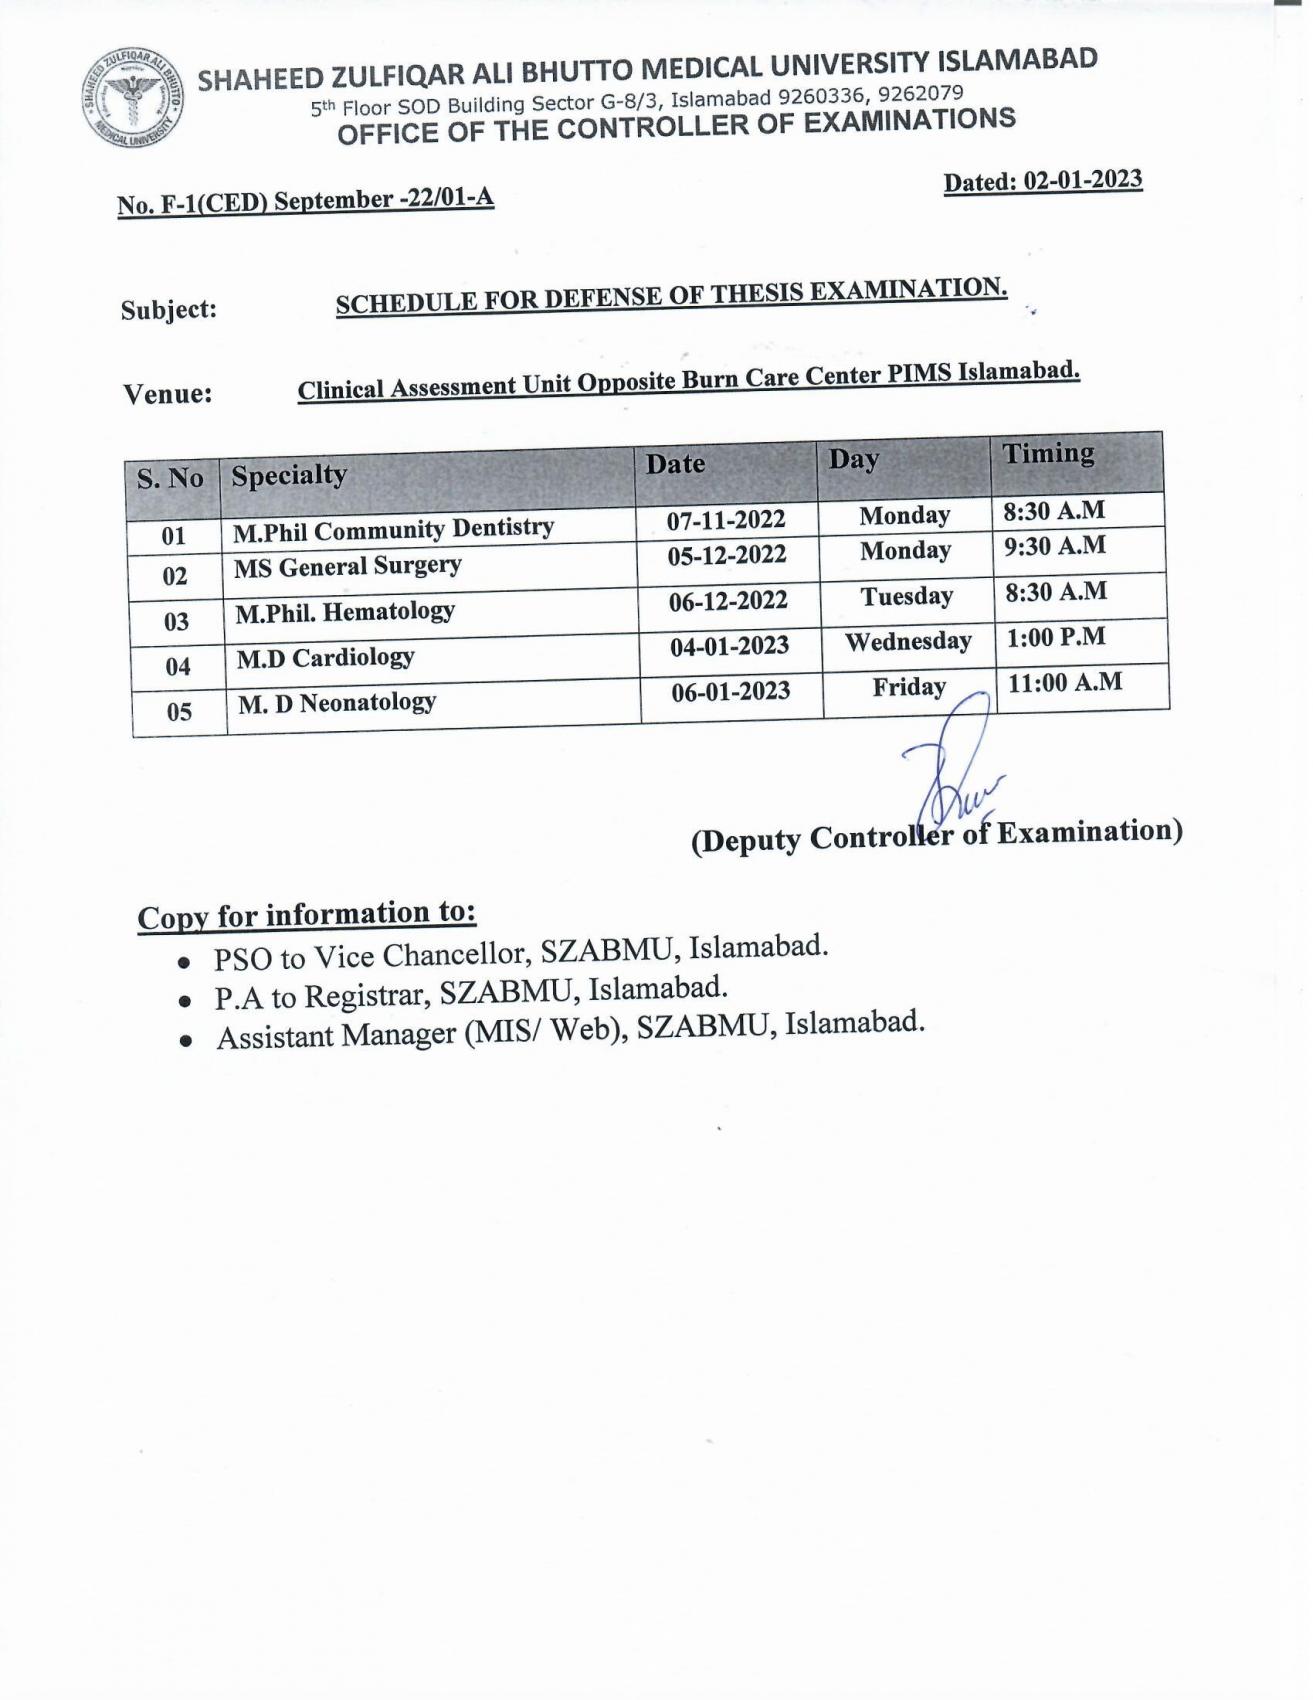 Schedule for Defense of Thesis Examinations